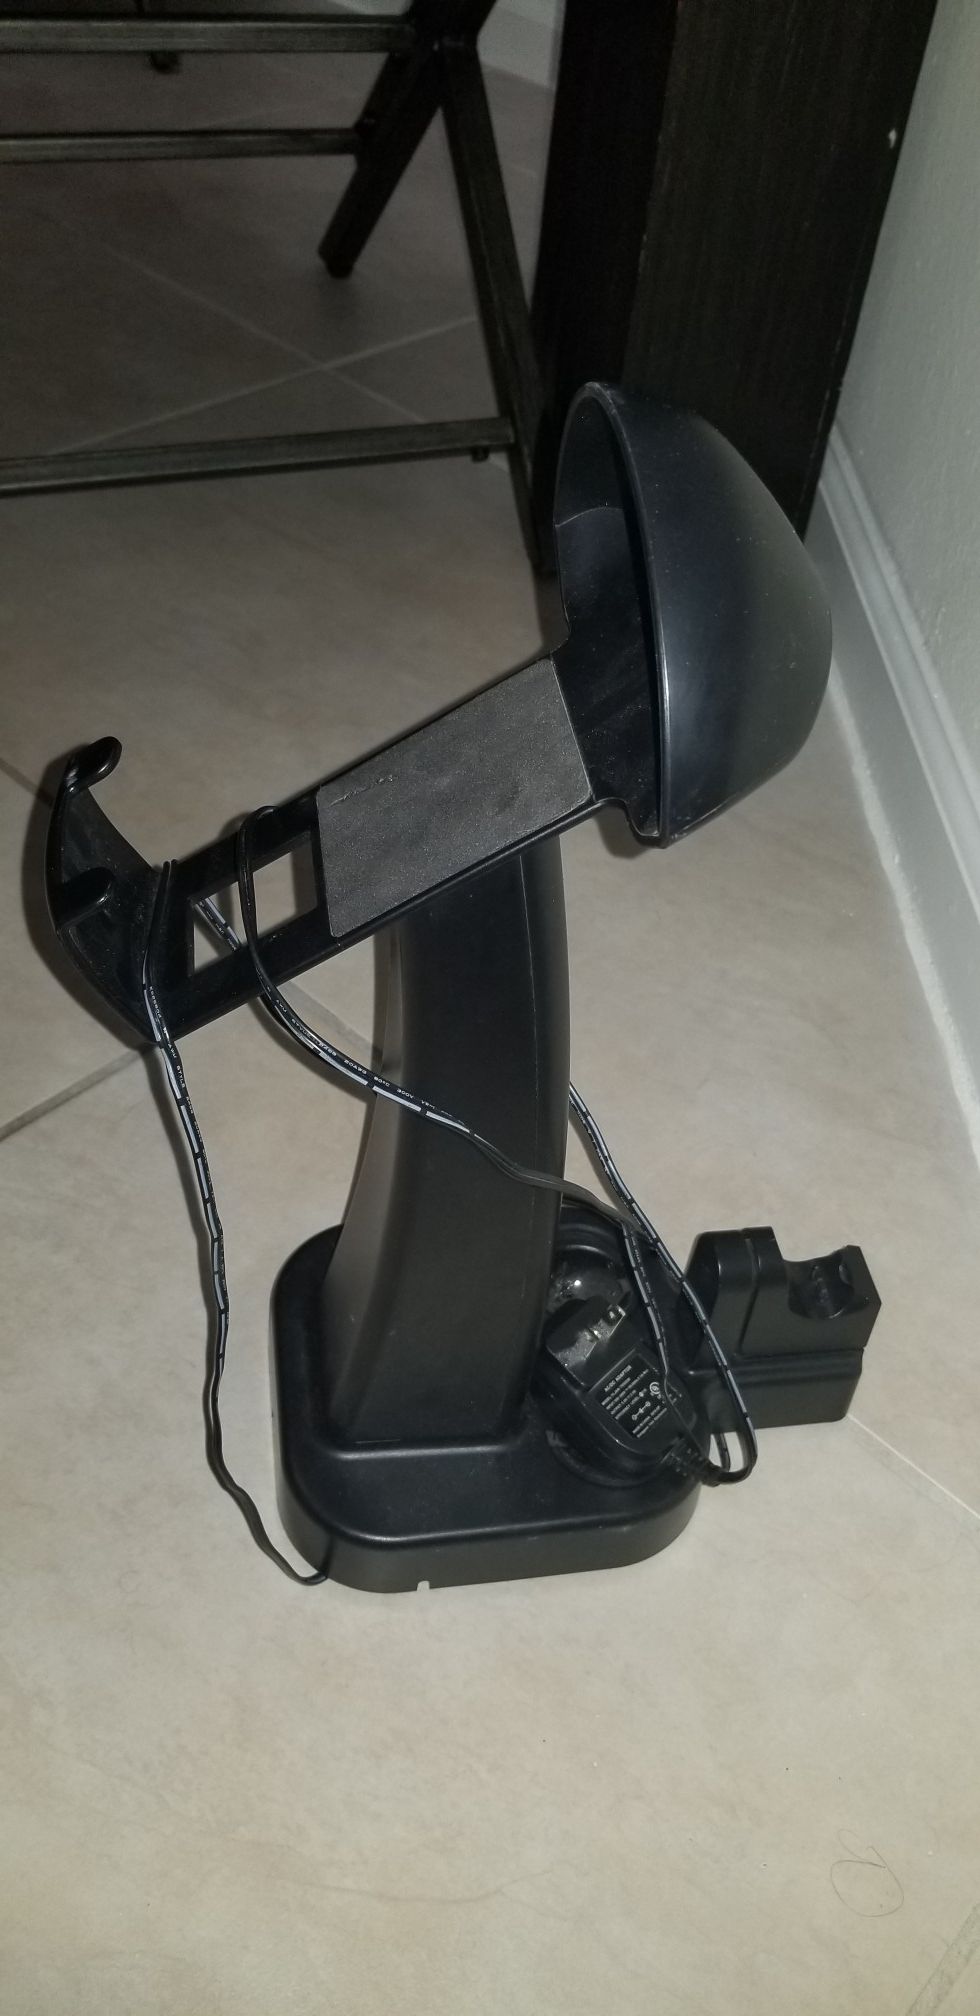 Headset headphone stand for playstation VR